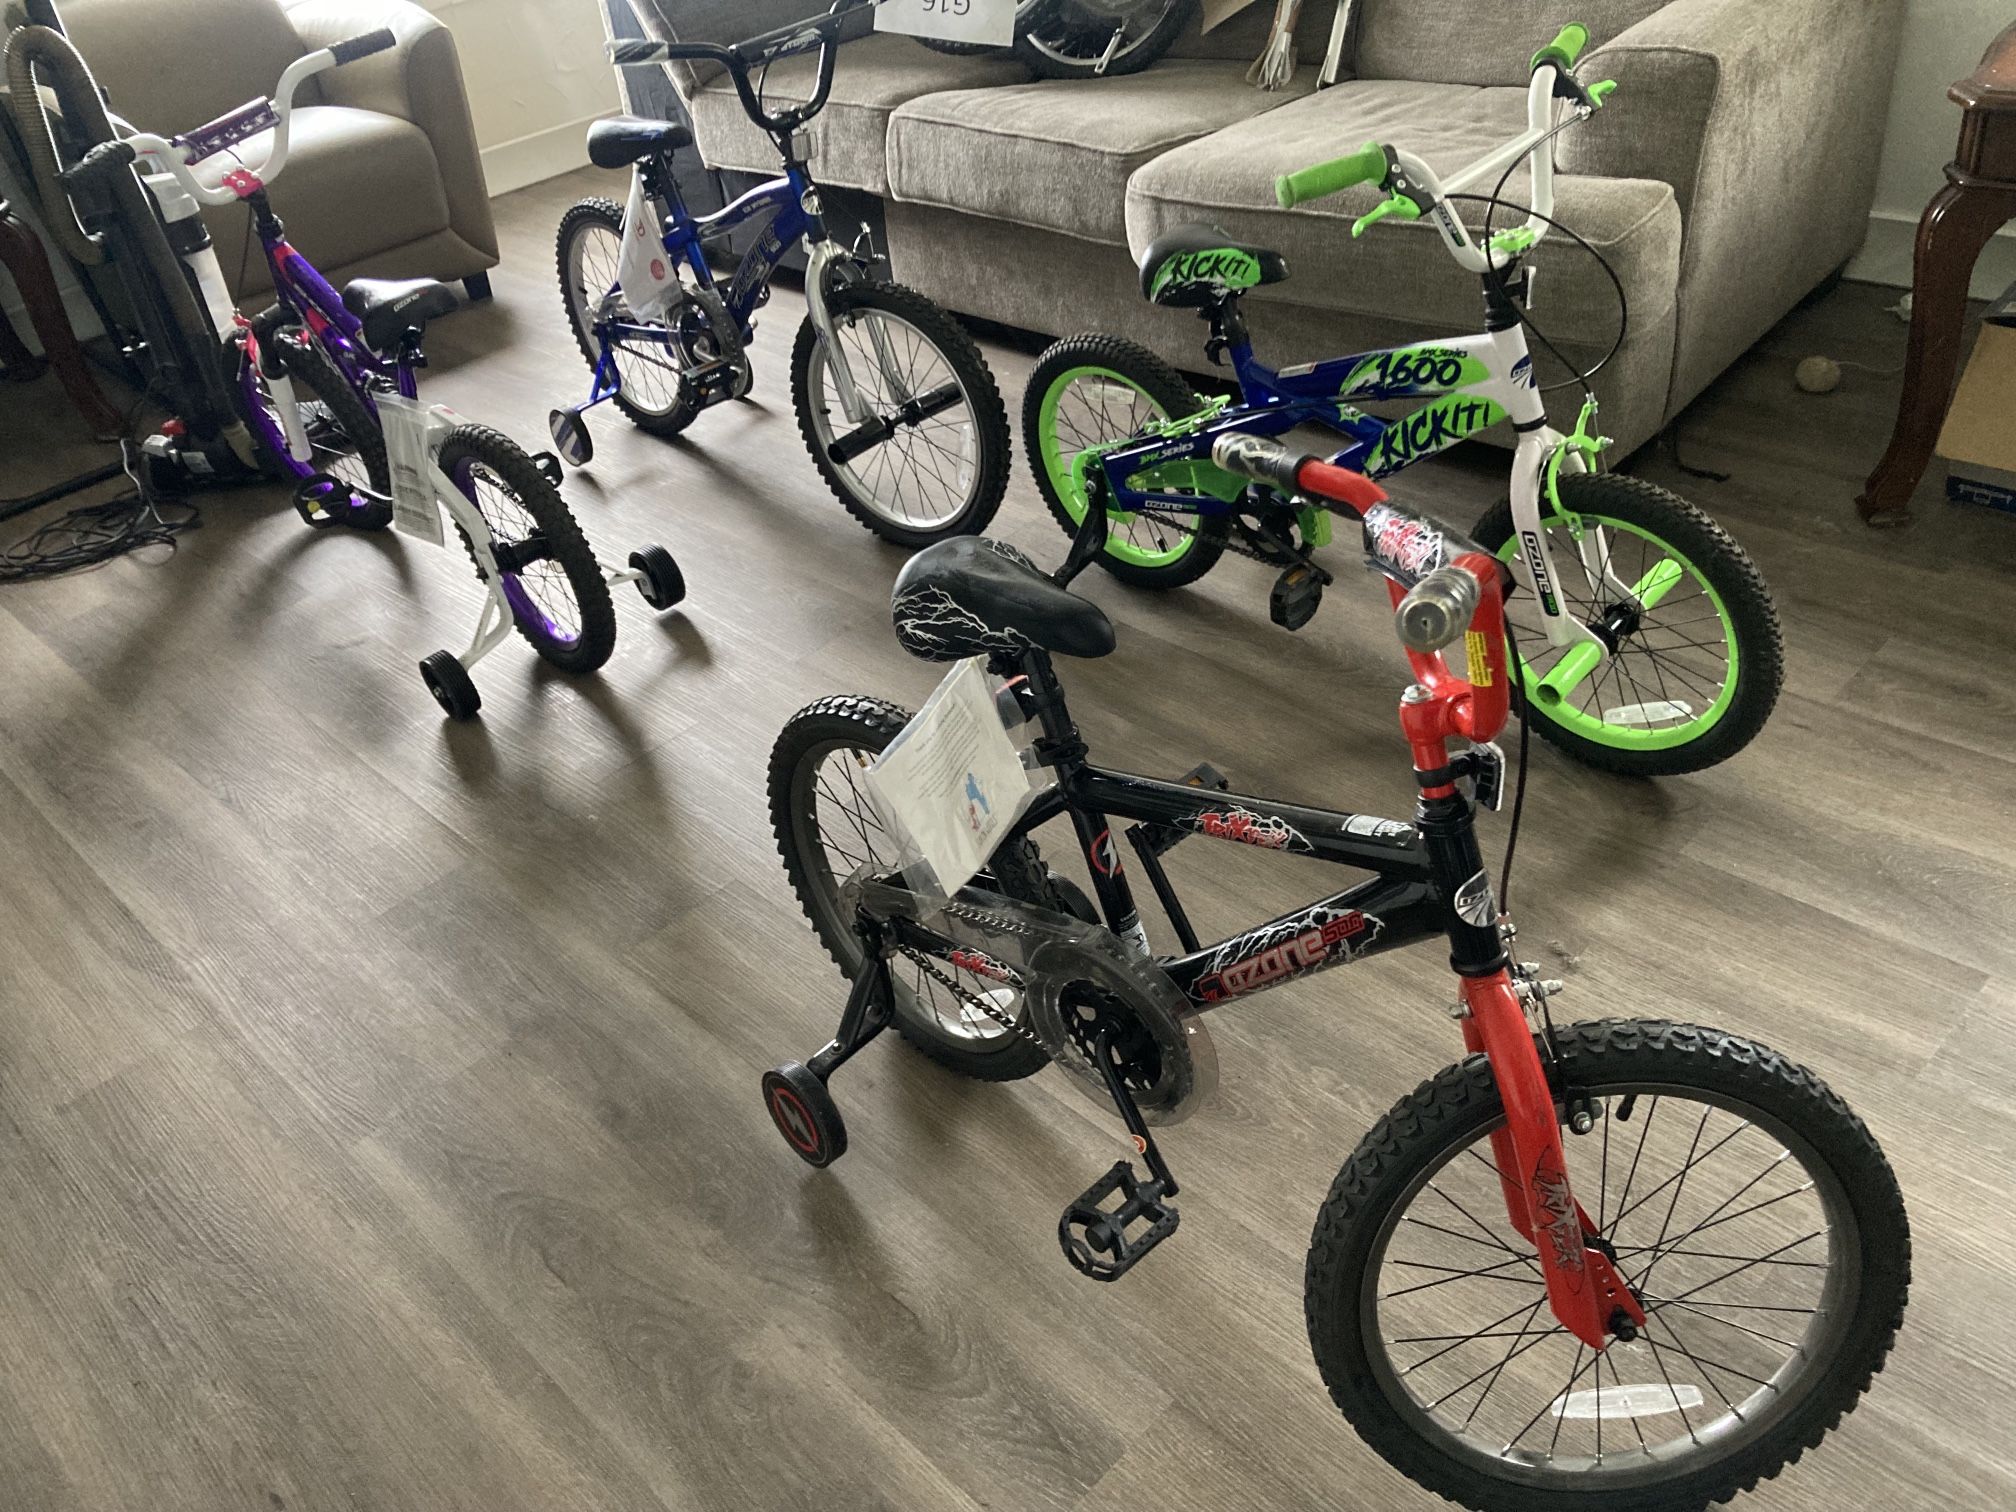 All Little Kids Bikes Start At 75$ If The Photo No longer There It’s Been Sold🤷🏽‍♂️